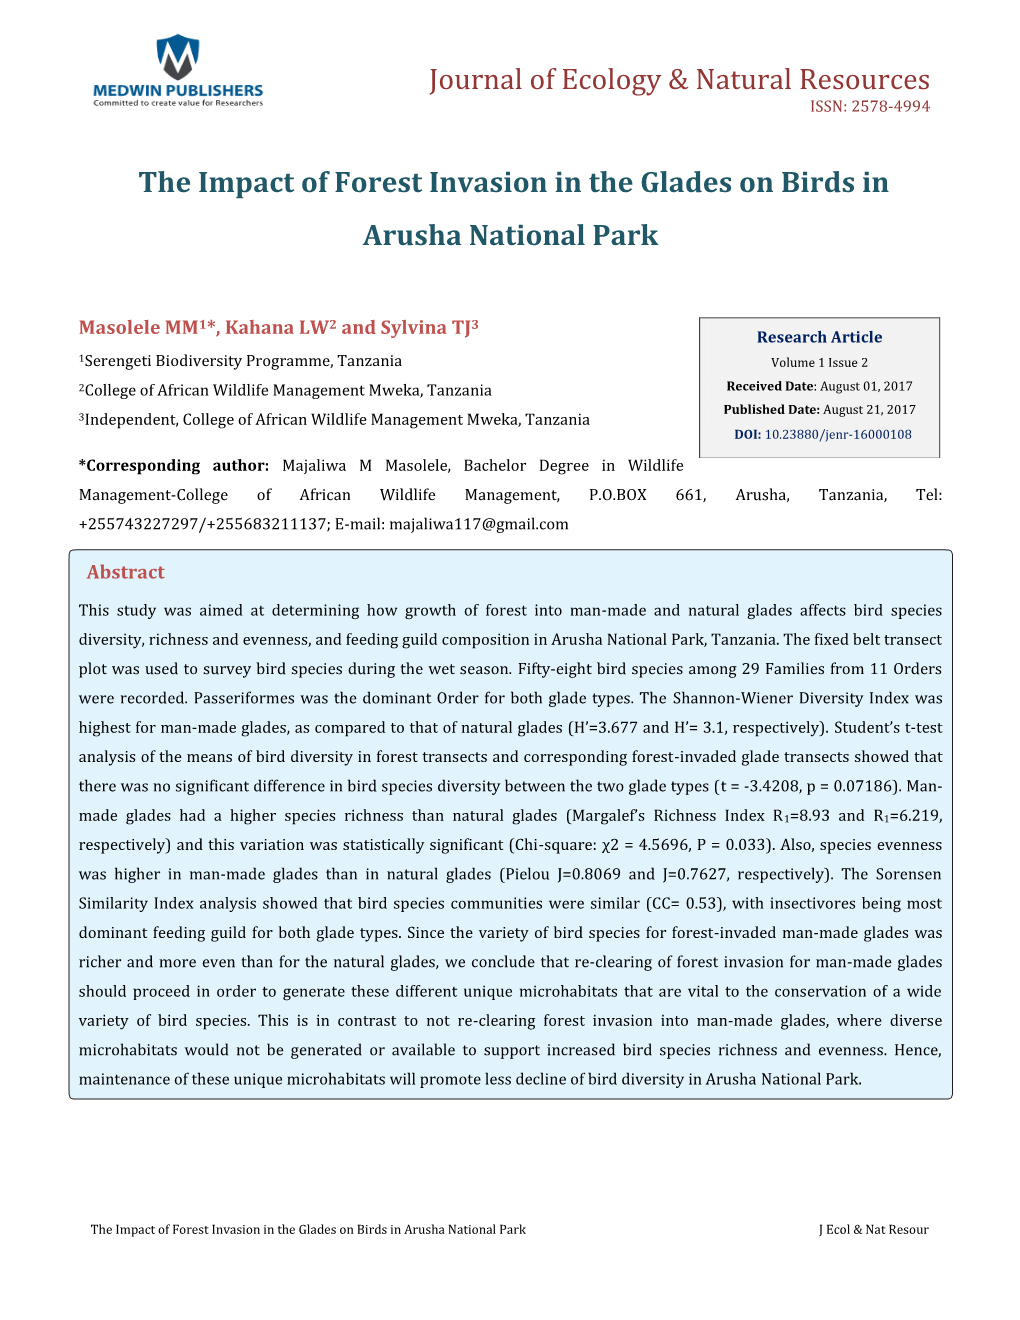 Masolele MM. the Impact of Forest Invasion in the Glades on Birds in Arusha Copyright© Masolele MM